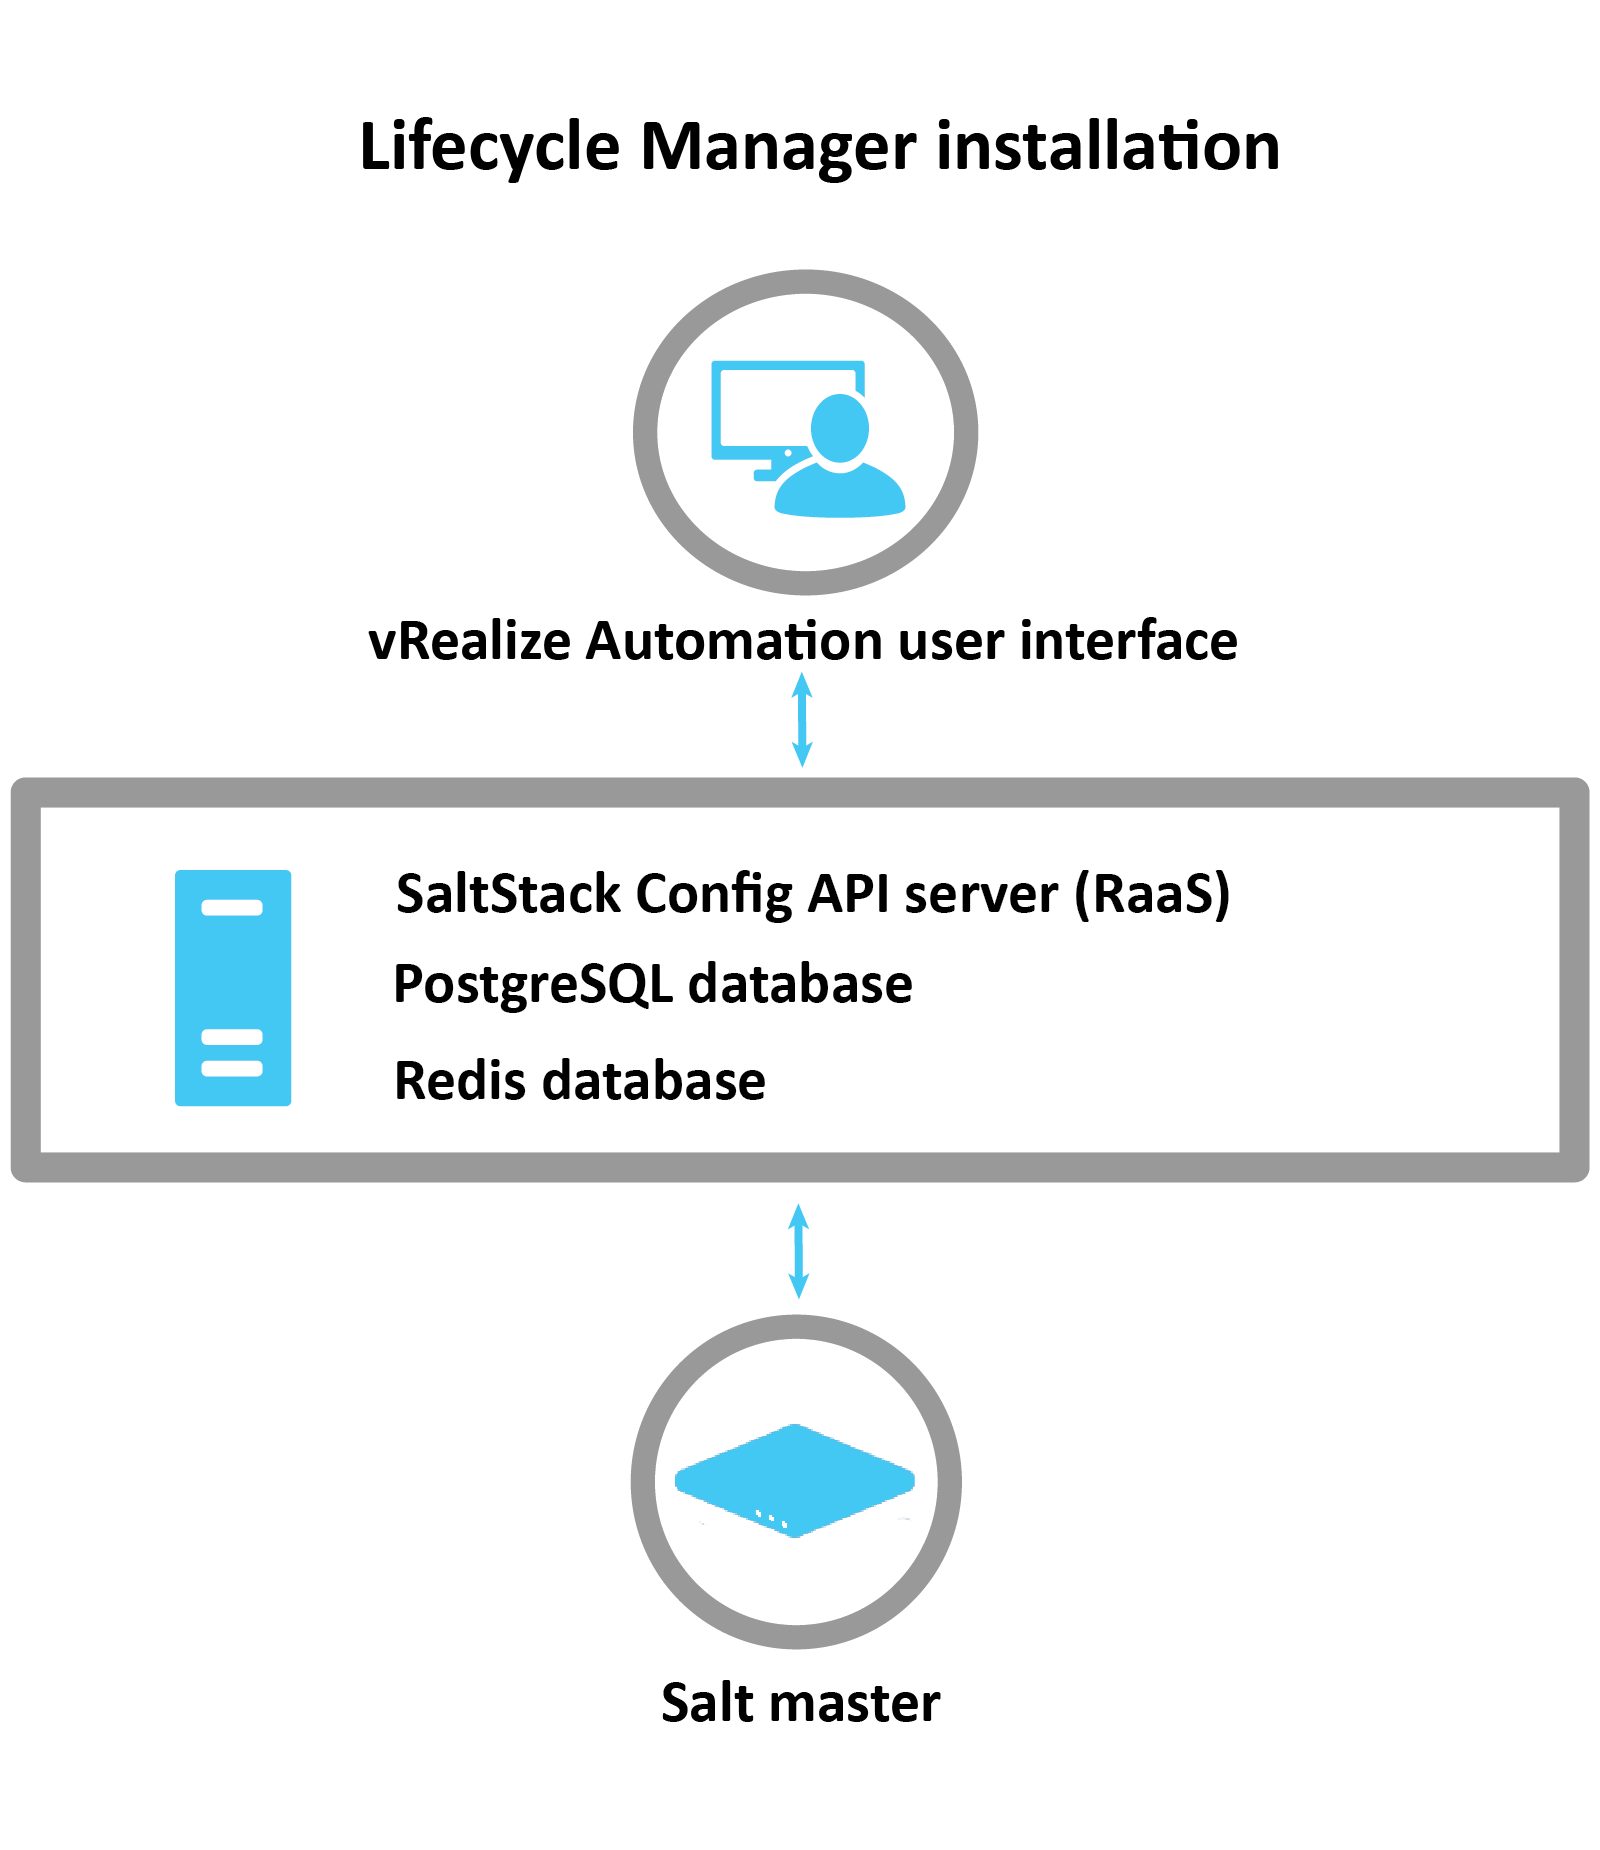 Diagram explaining how SaltStack Config is installed via LCM: LCM uses the vRA interface to install the RaaS server, Postgres database, and redis database. Once installed, the Salt Master is configured.